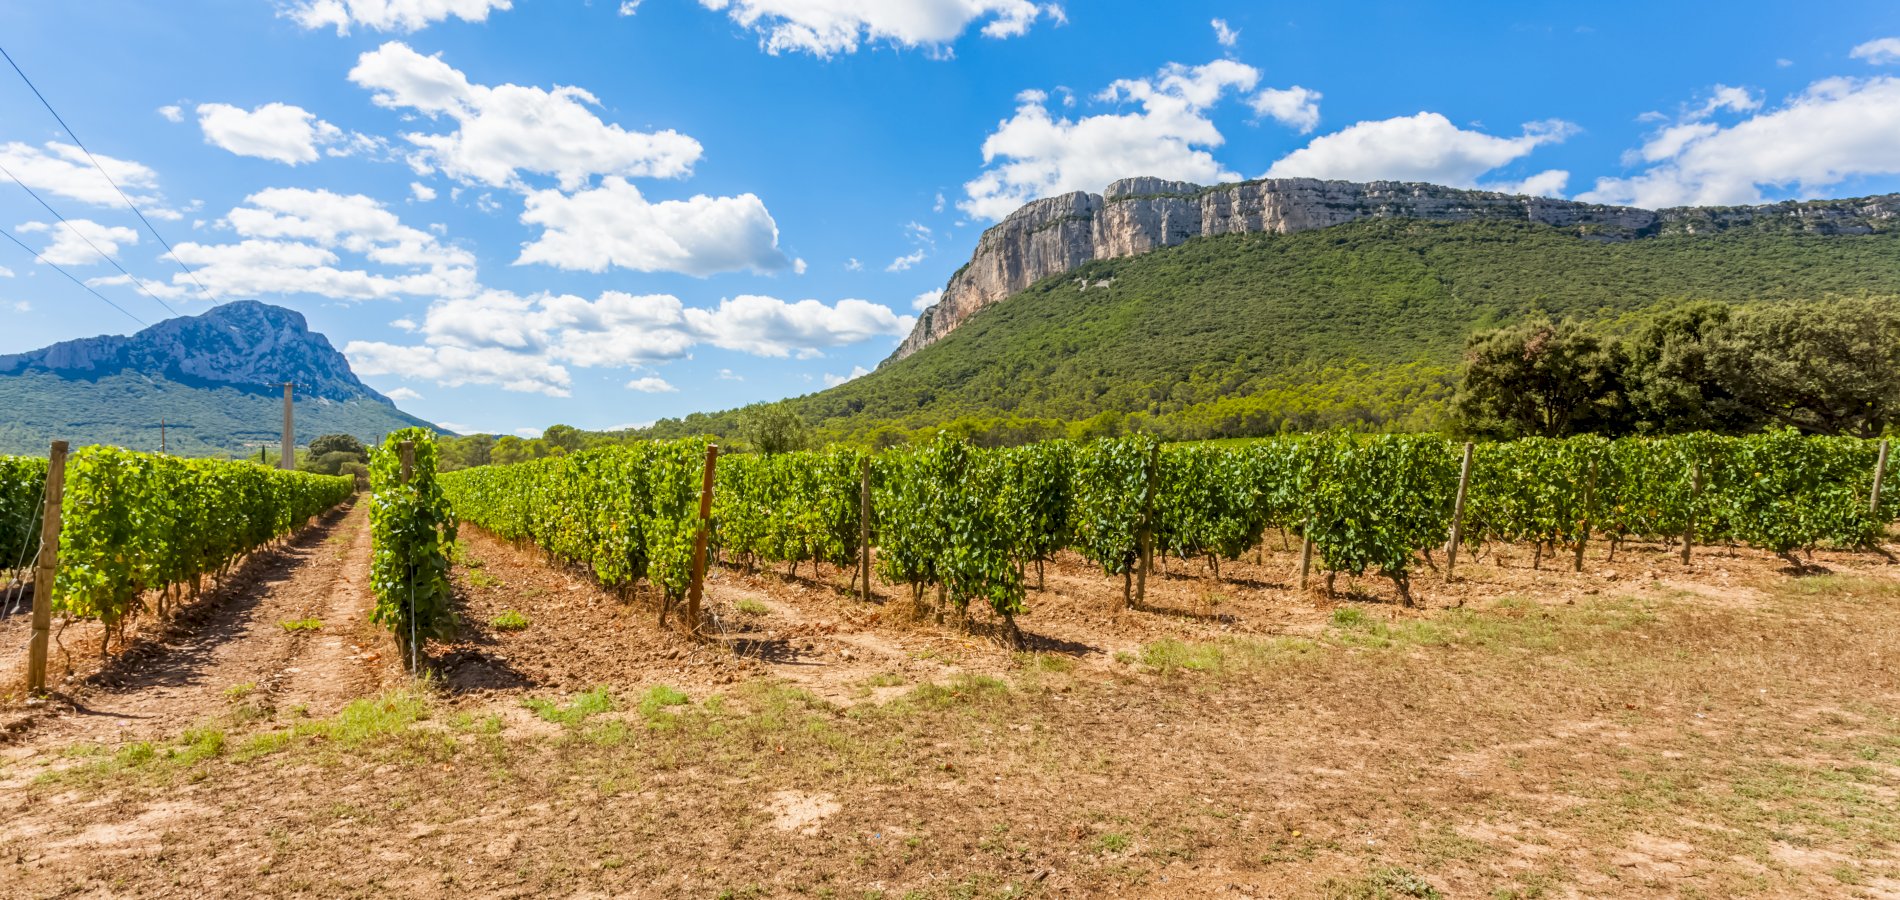 Ophorus Tours - From Montpellier Languedoc Wine Tour & Oyster Tasting half-day trip